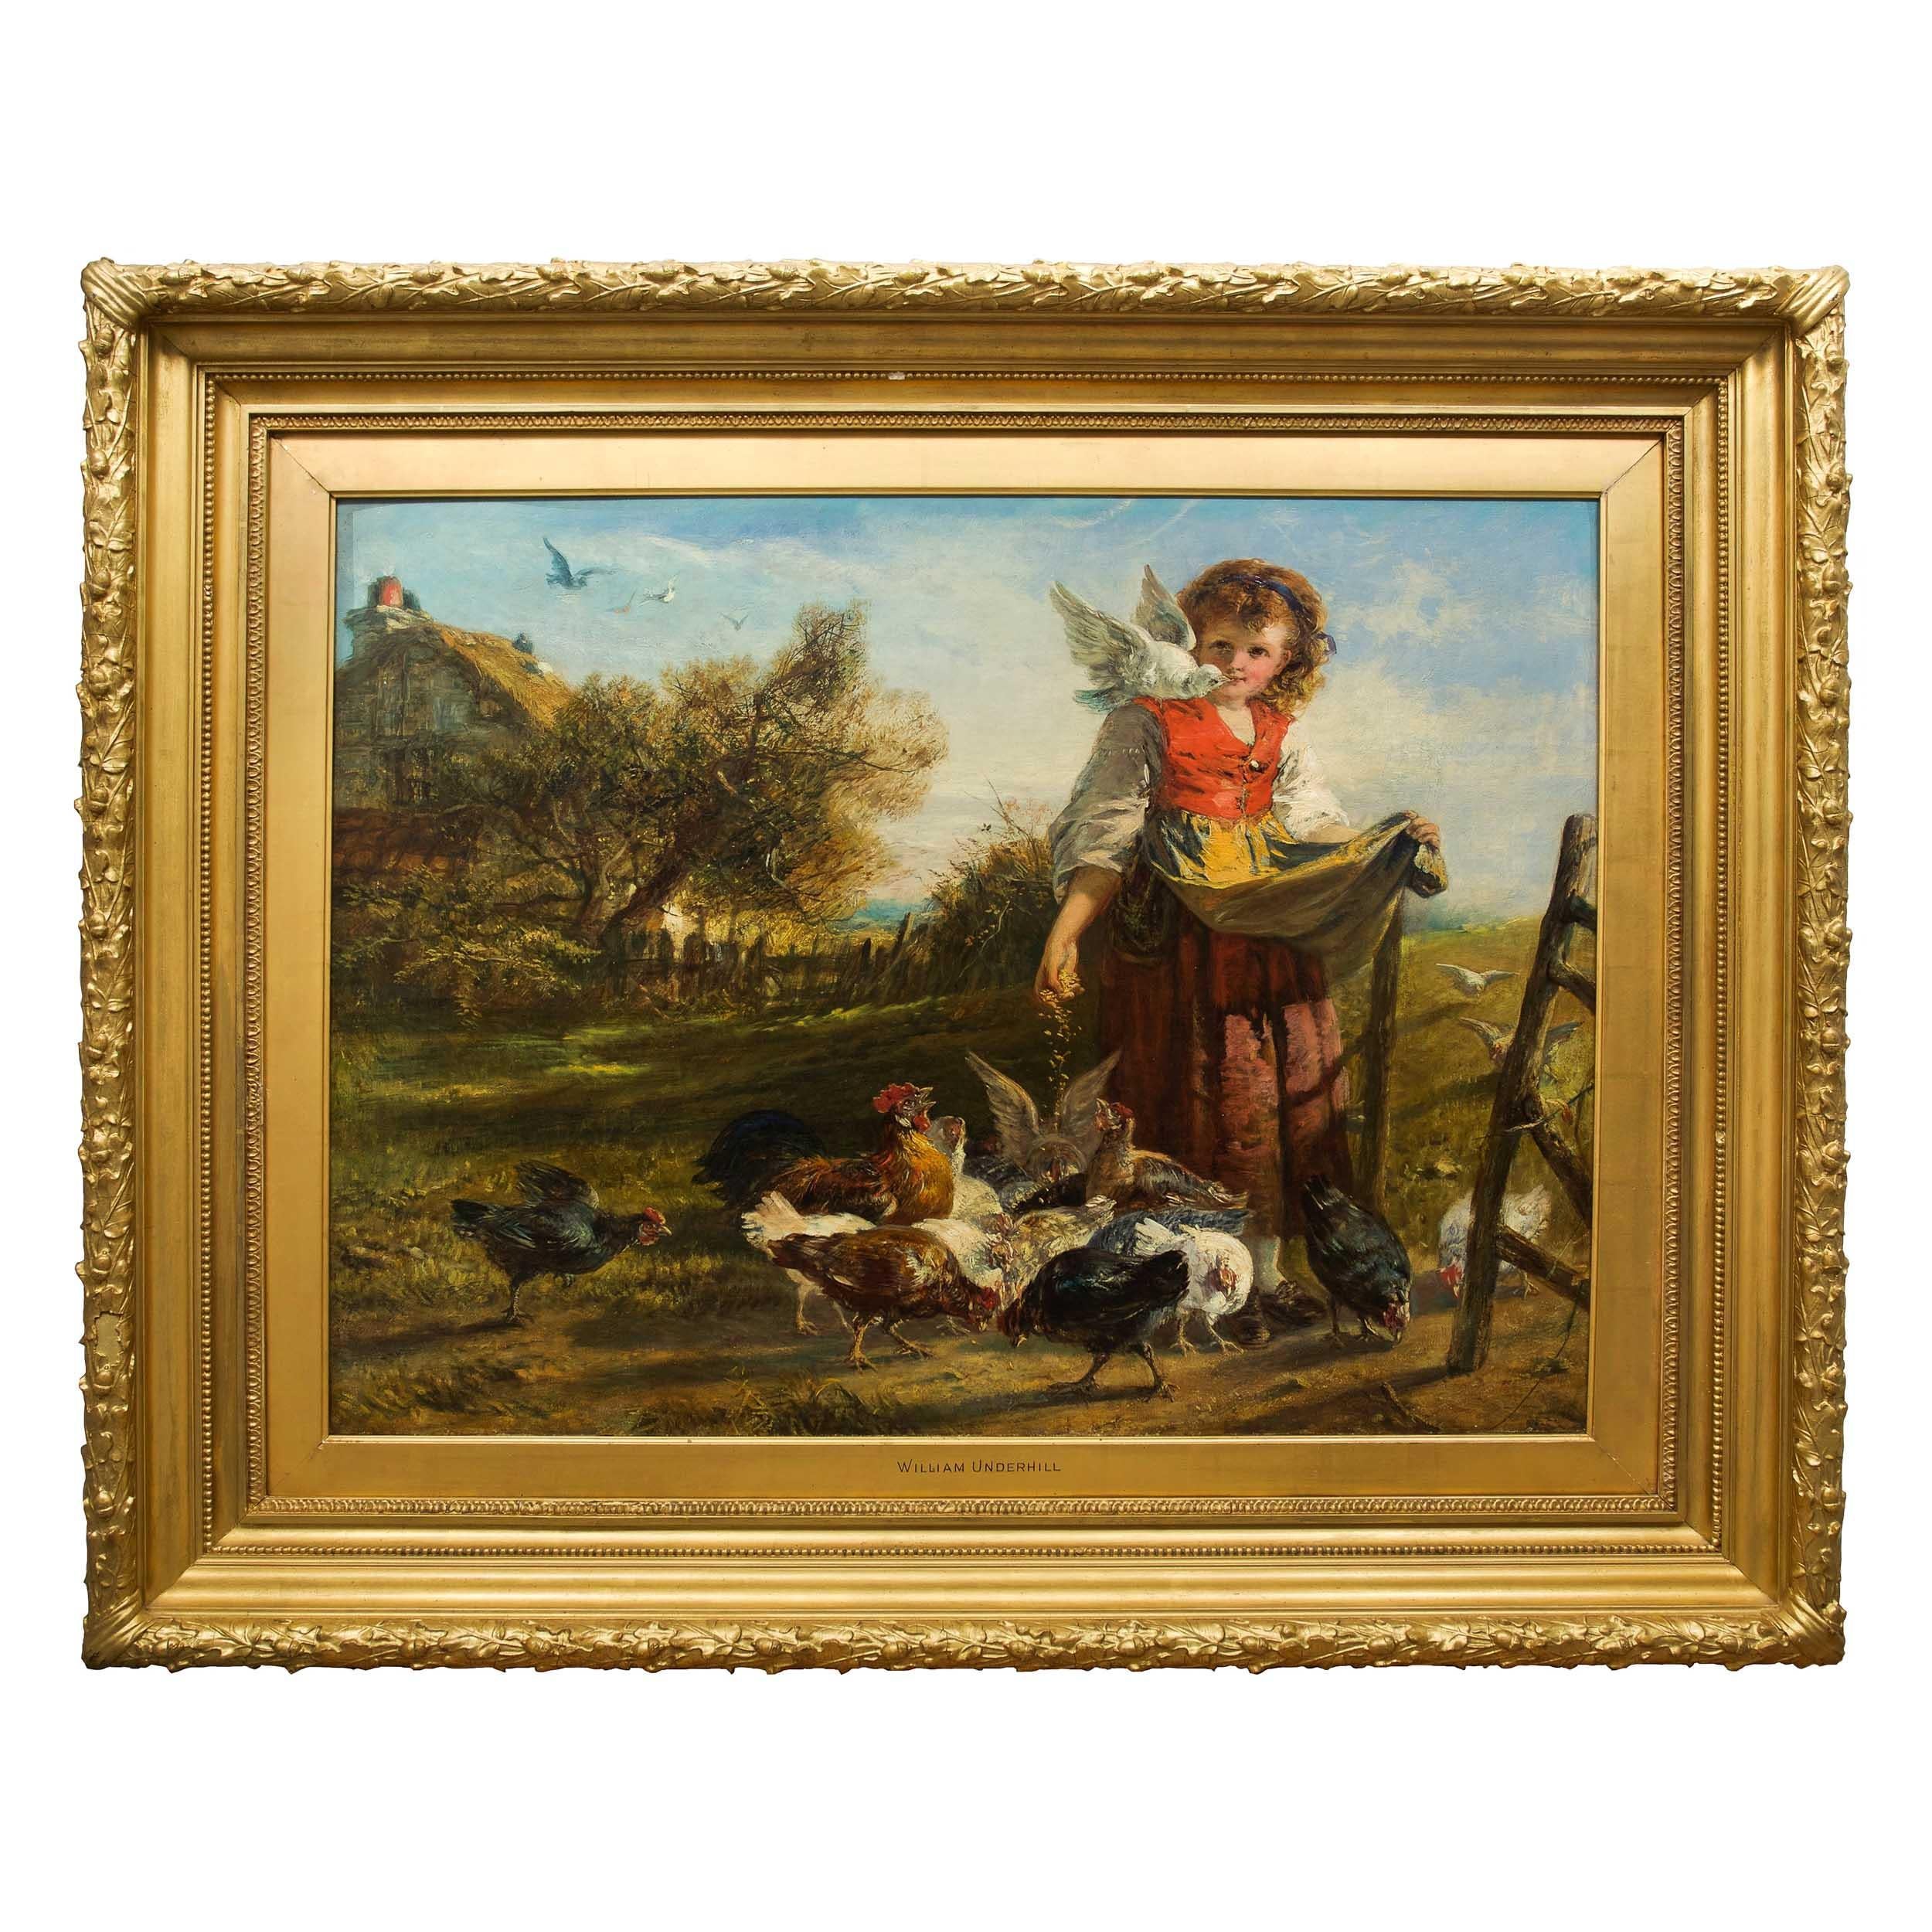 A wonderful nostalgic scene that depicts a young girl in the countryside on a farm surrounded by chickens that have gathered at her feet hungrily pecking at the grains she scatters for them. In the distance a few birds are making their way towards